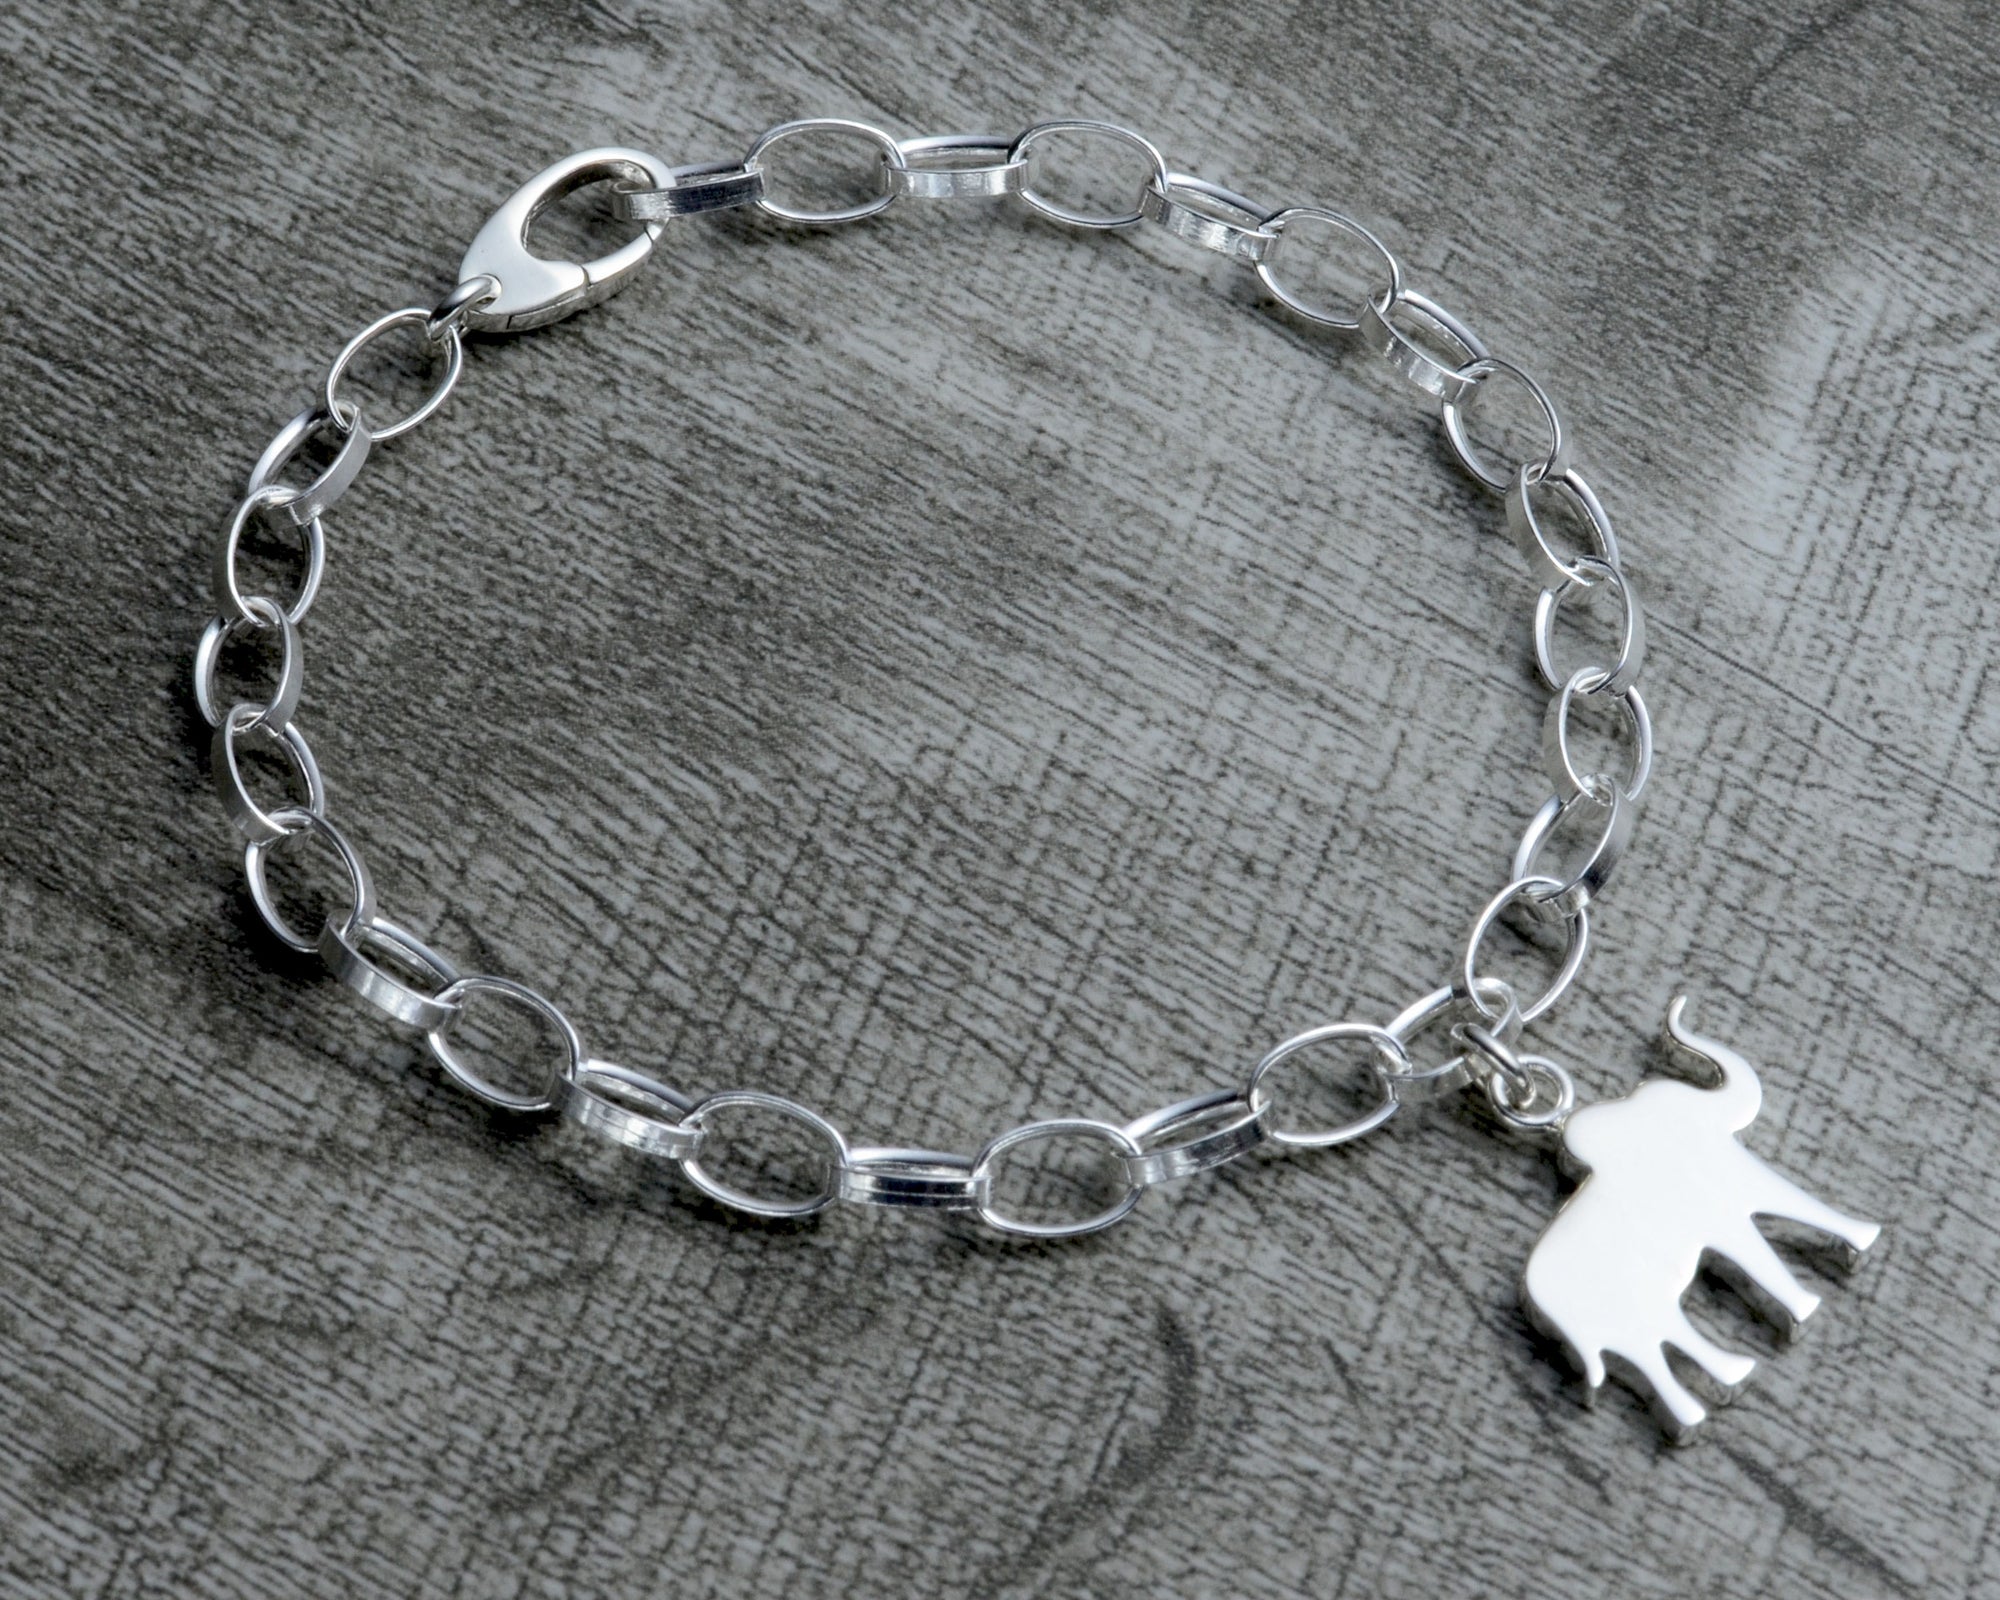 Personalized elephant charm bracelet in sterling silver with clasp